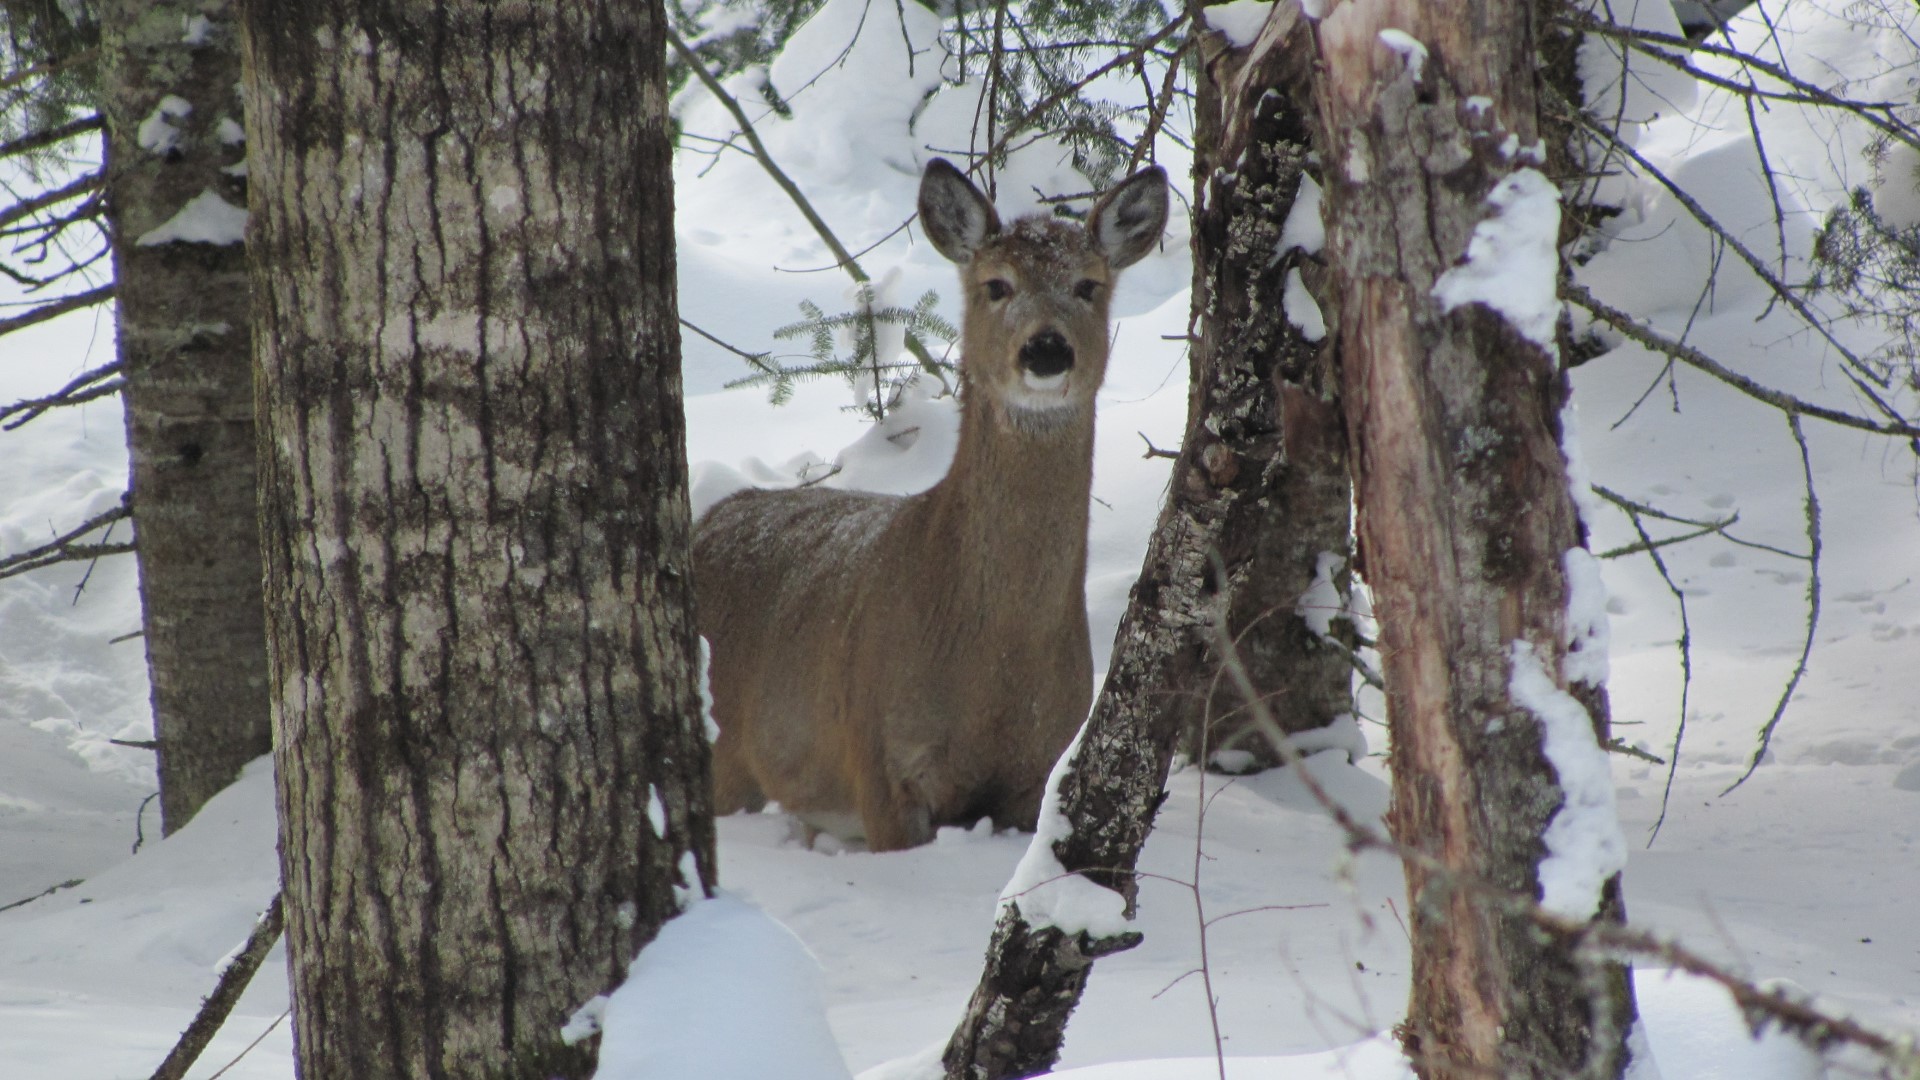 Severe winters aren't anything new, but during seasons like this, deer, and especially fawn, struggle to survive.